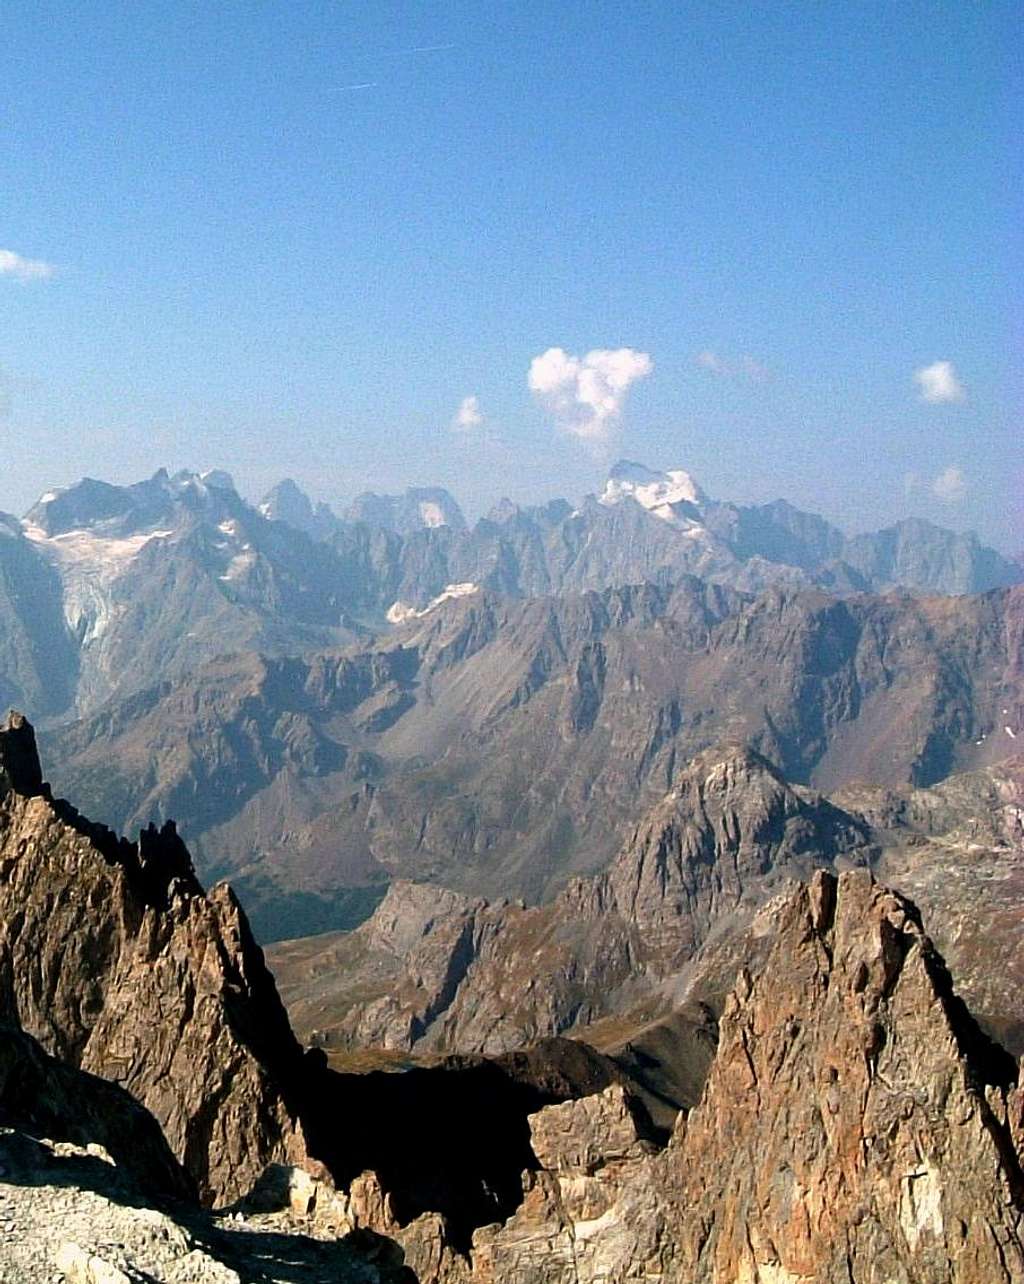 The Ecrins seen from Pointe des Cerces